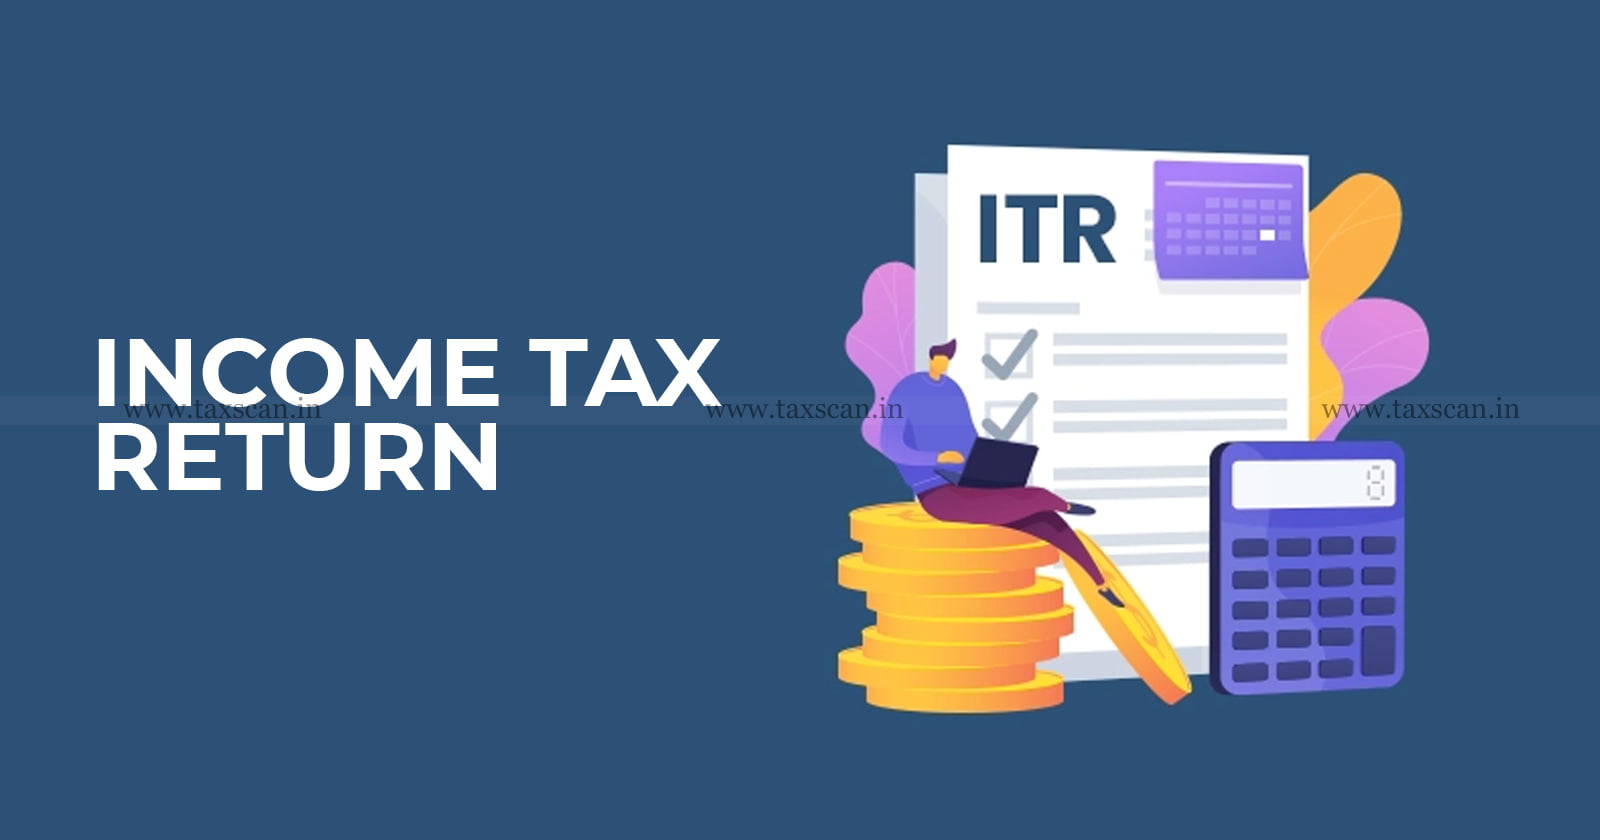 Assessee shall file Rectification Application to Rectify Typographical  Errors in ITR, Not Appeal: ITAT